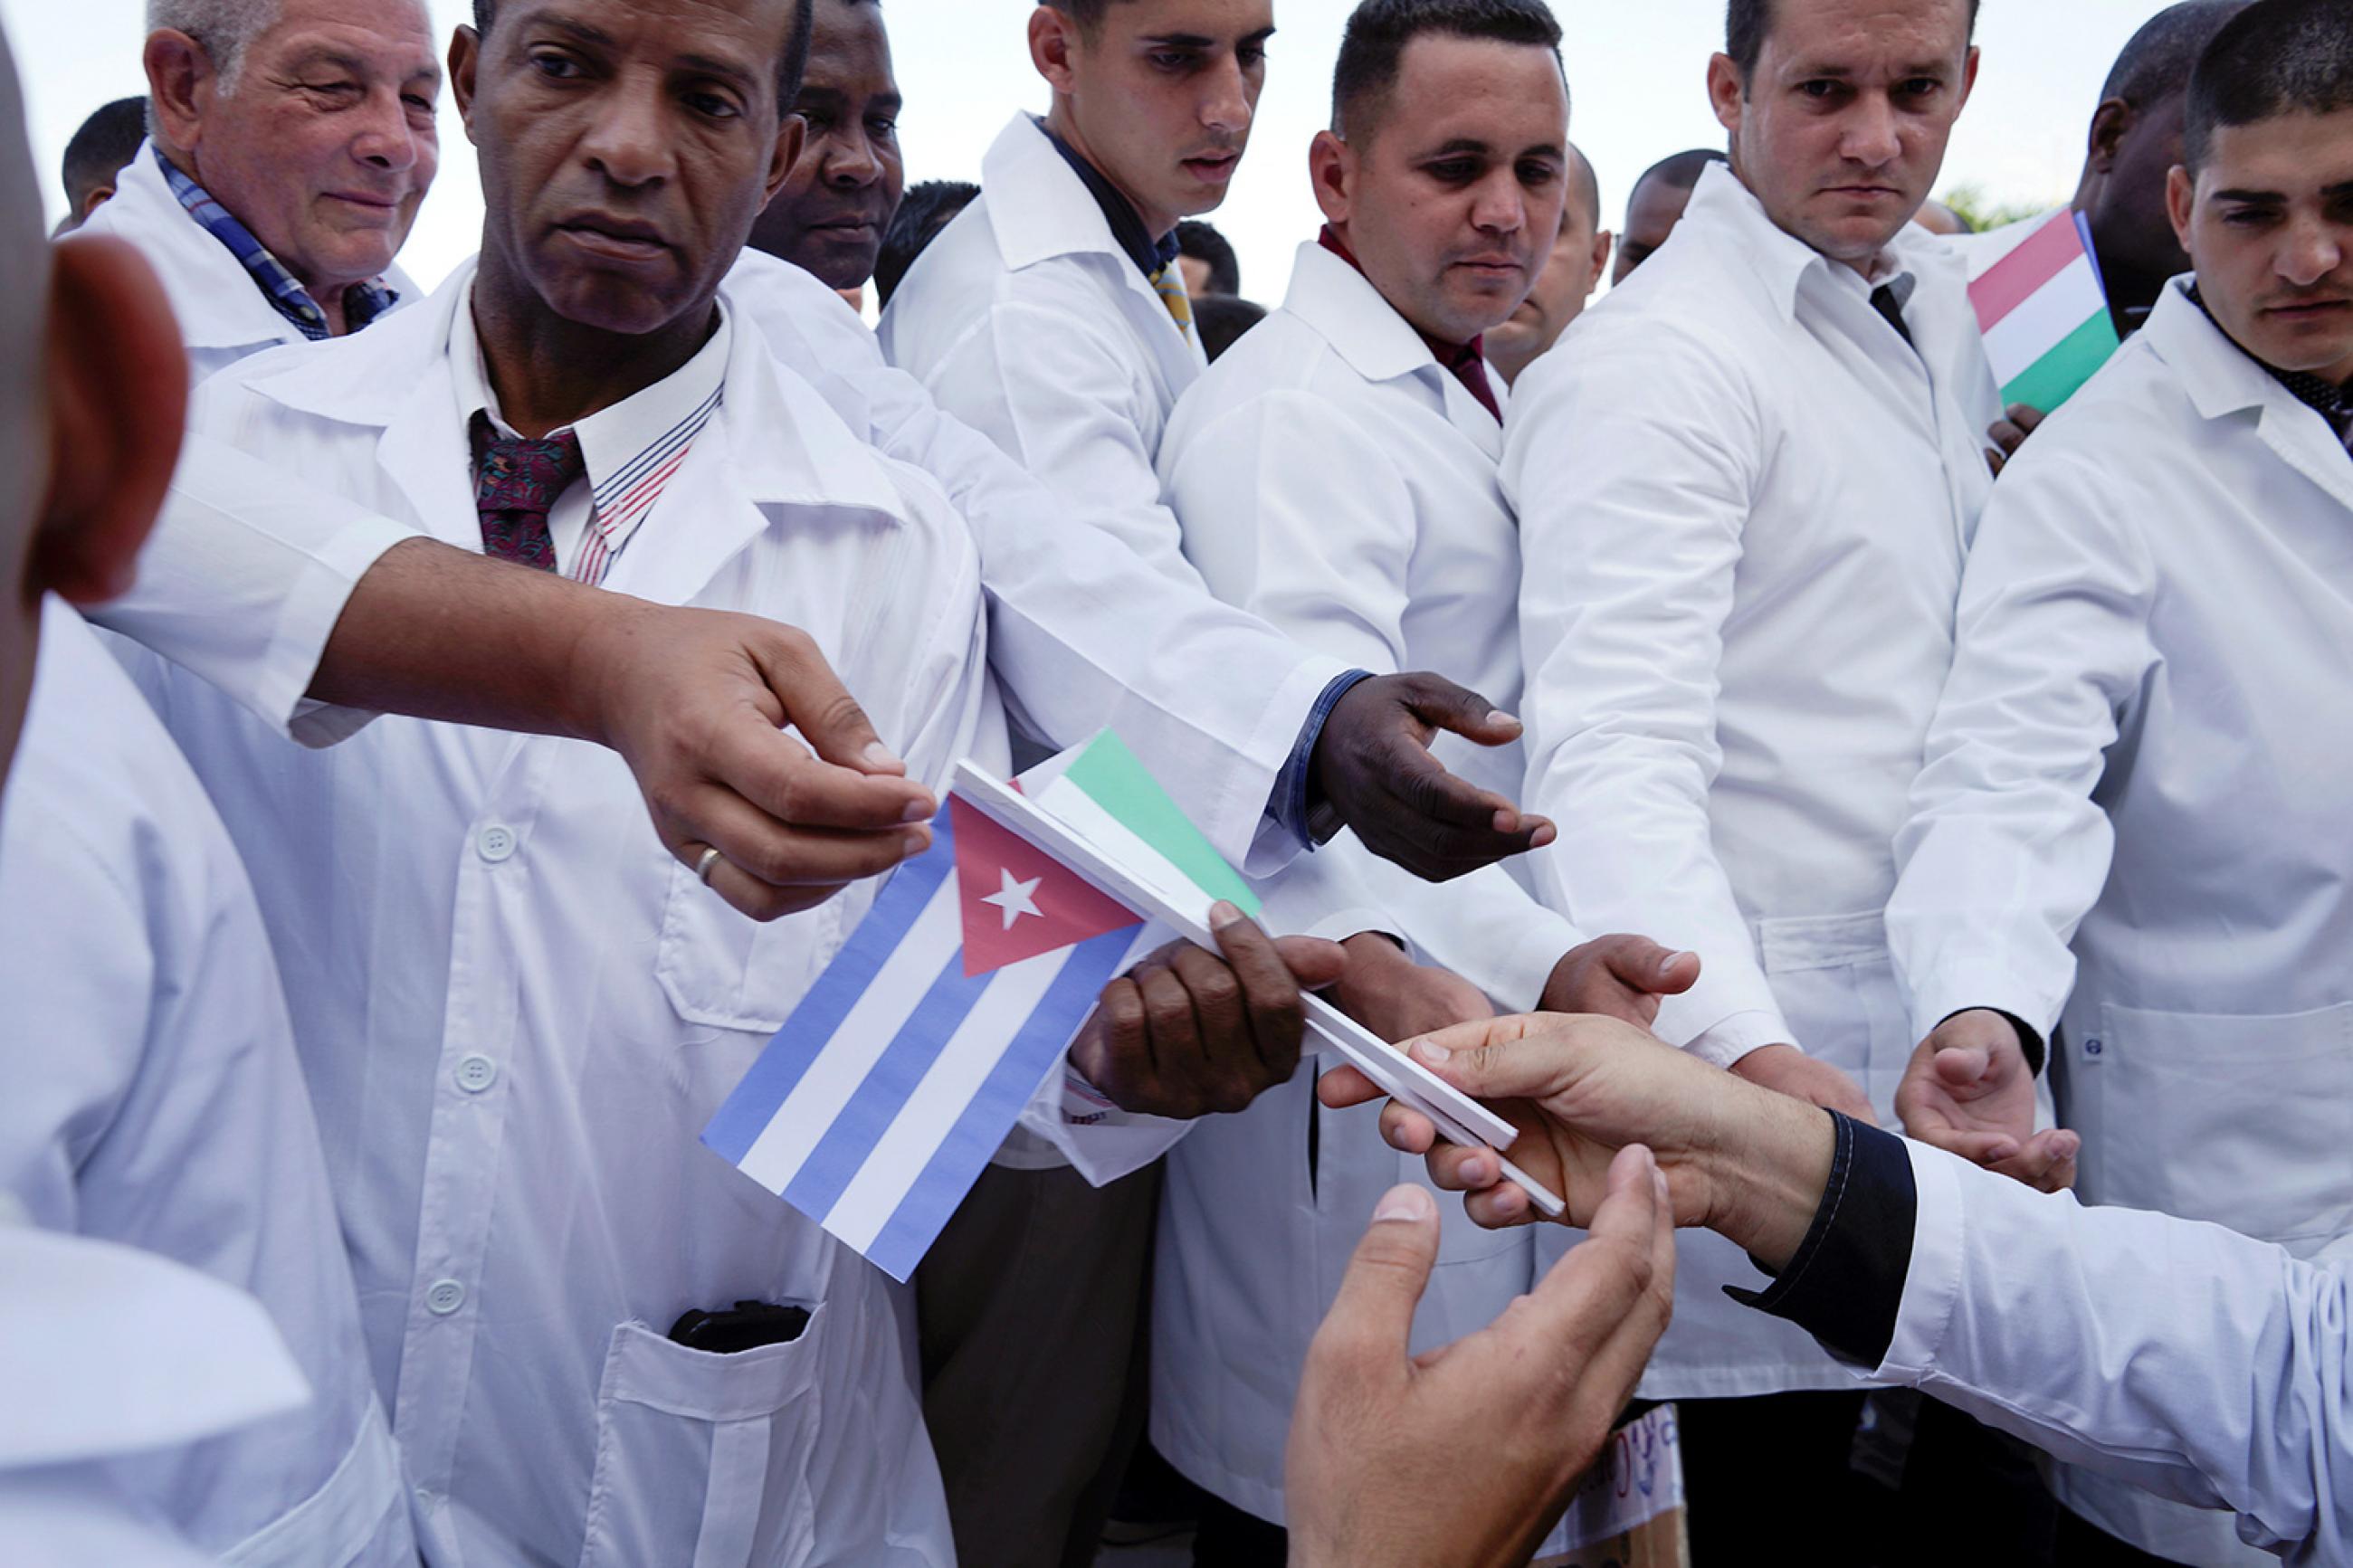 Cuban doctors receive Cuban and Italian flags during a farewell ceremony before departing to Italy to assist, amid concerns about the spread of the coronavirus in Havana, Cuba, on March 21, 2020. the photo shows doctors lined up taking flags of Italy and cuba. REUTERS/Alexandre Meneghini